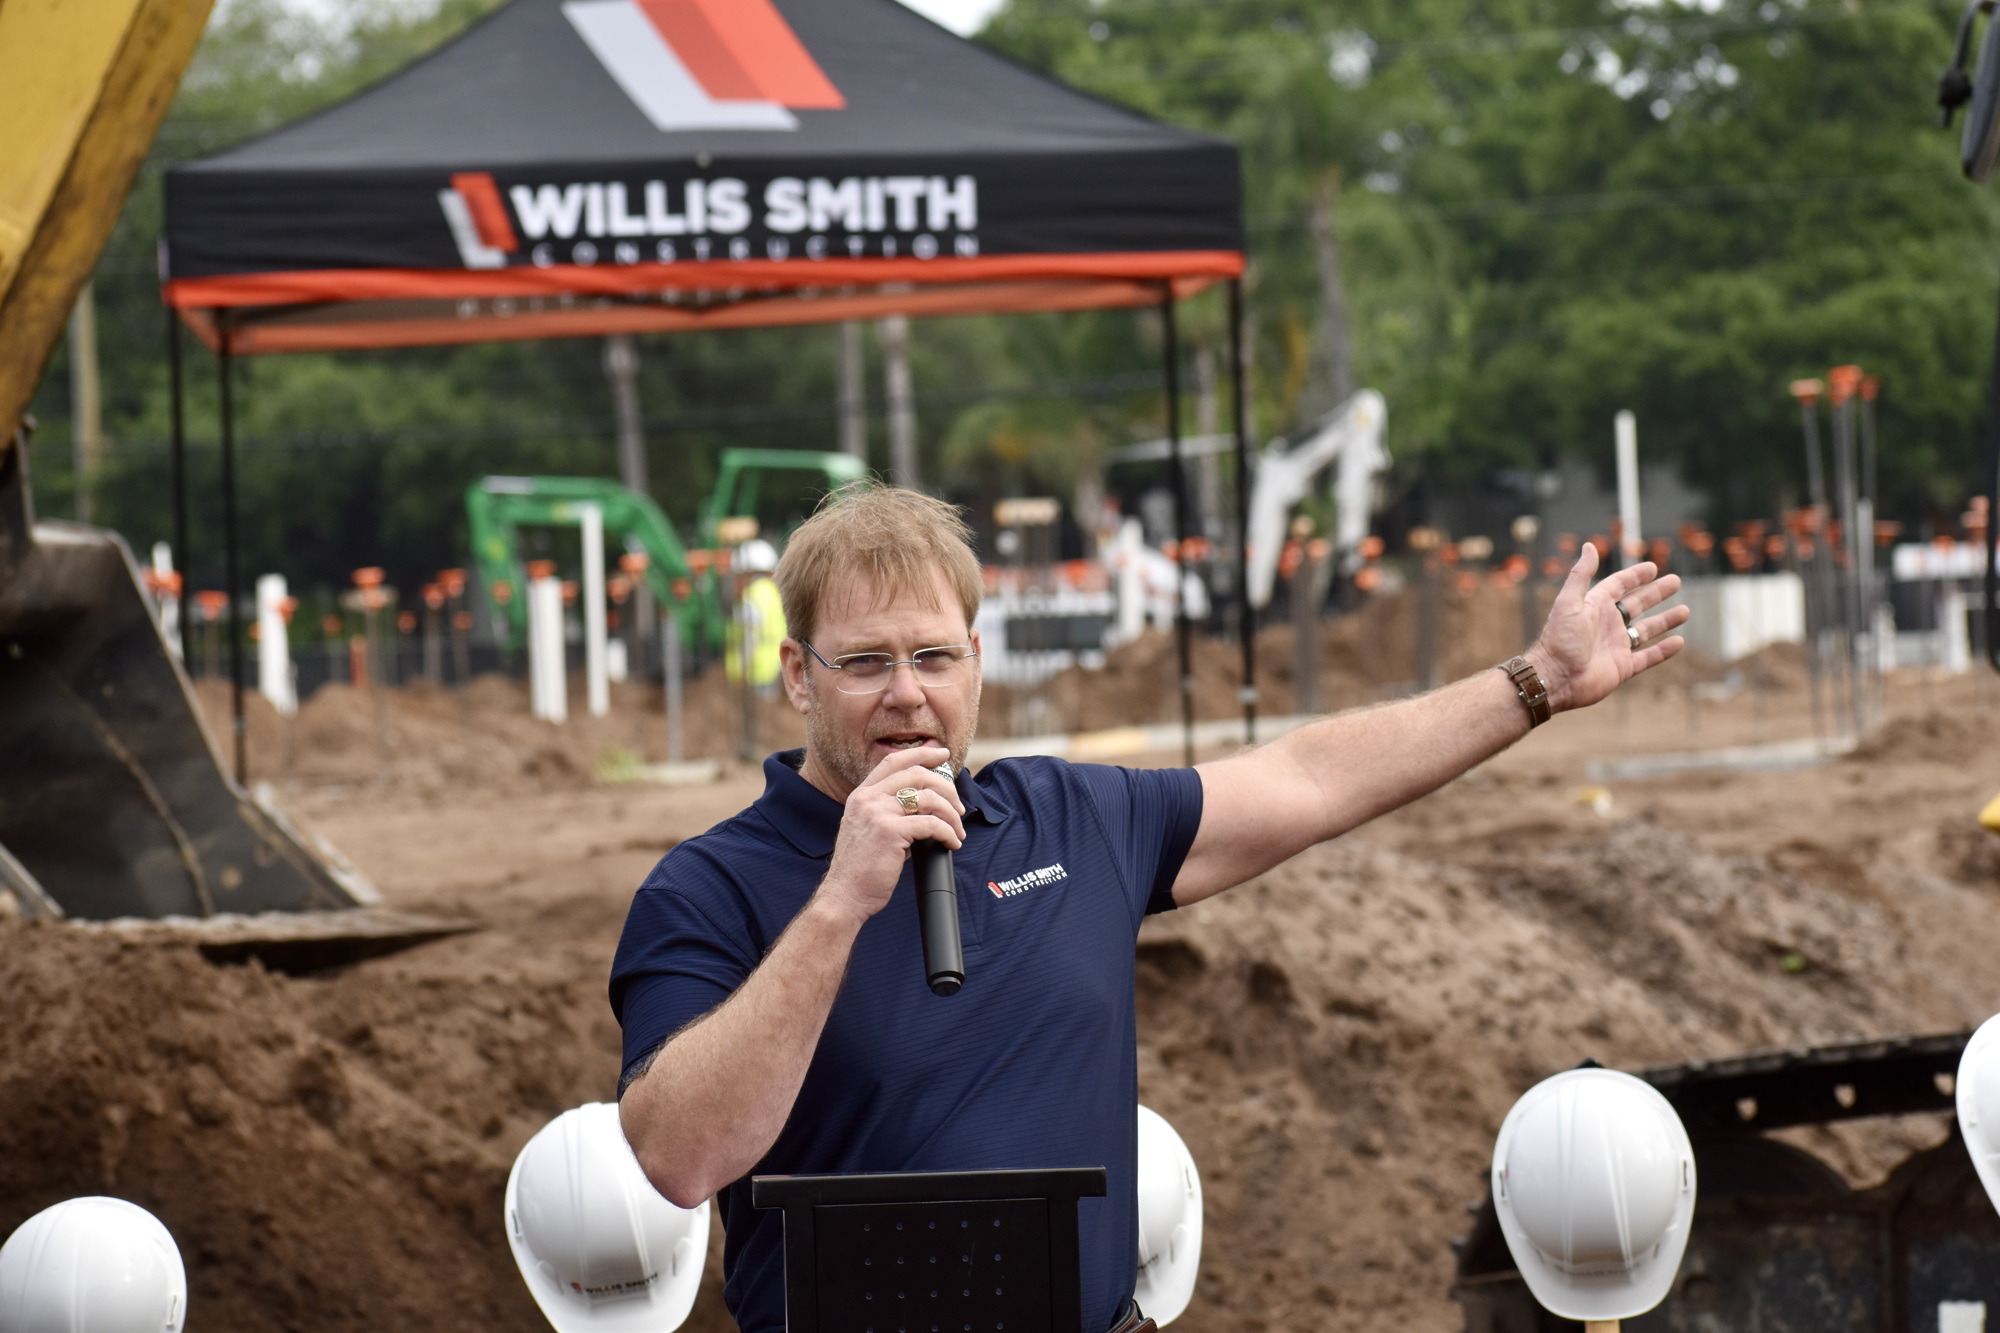 John LaCivita of Willis Smith Construction speaks to the gathered crowd at Thursday's ceremony.